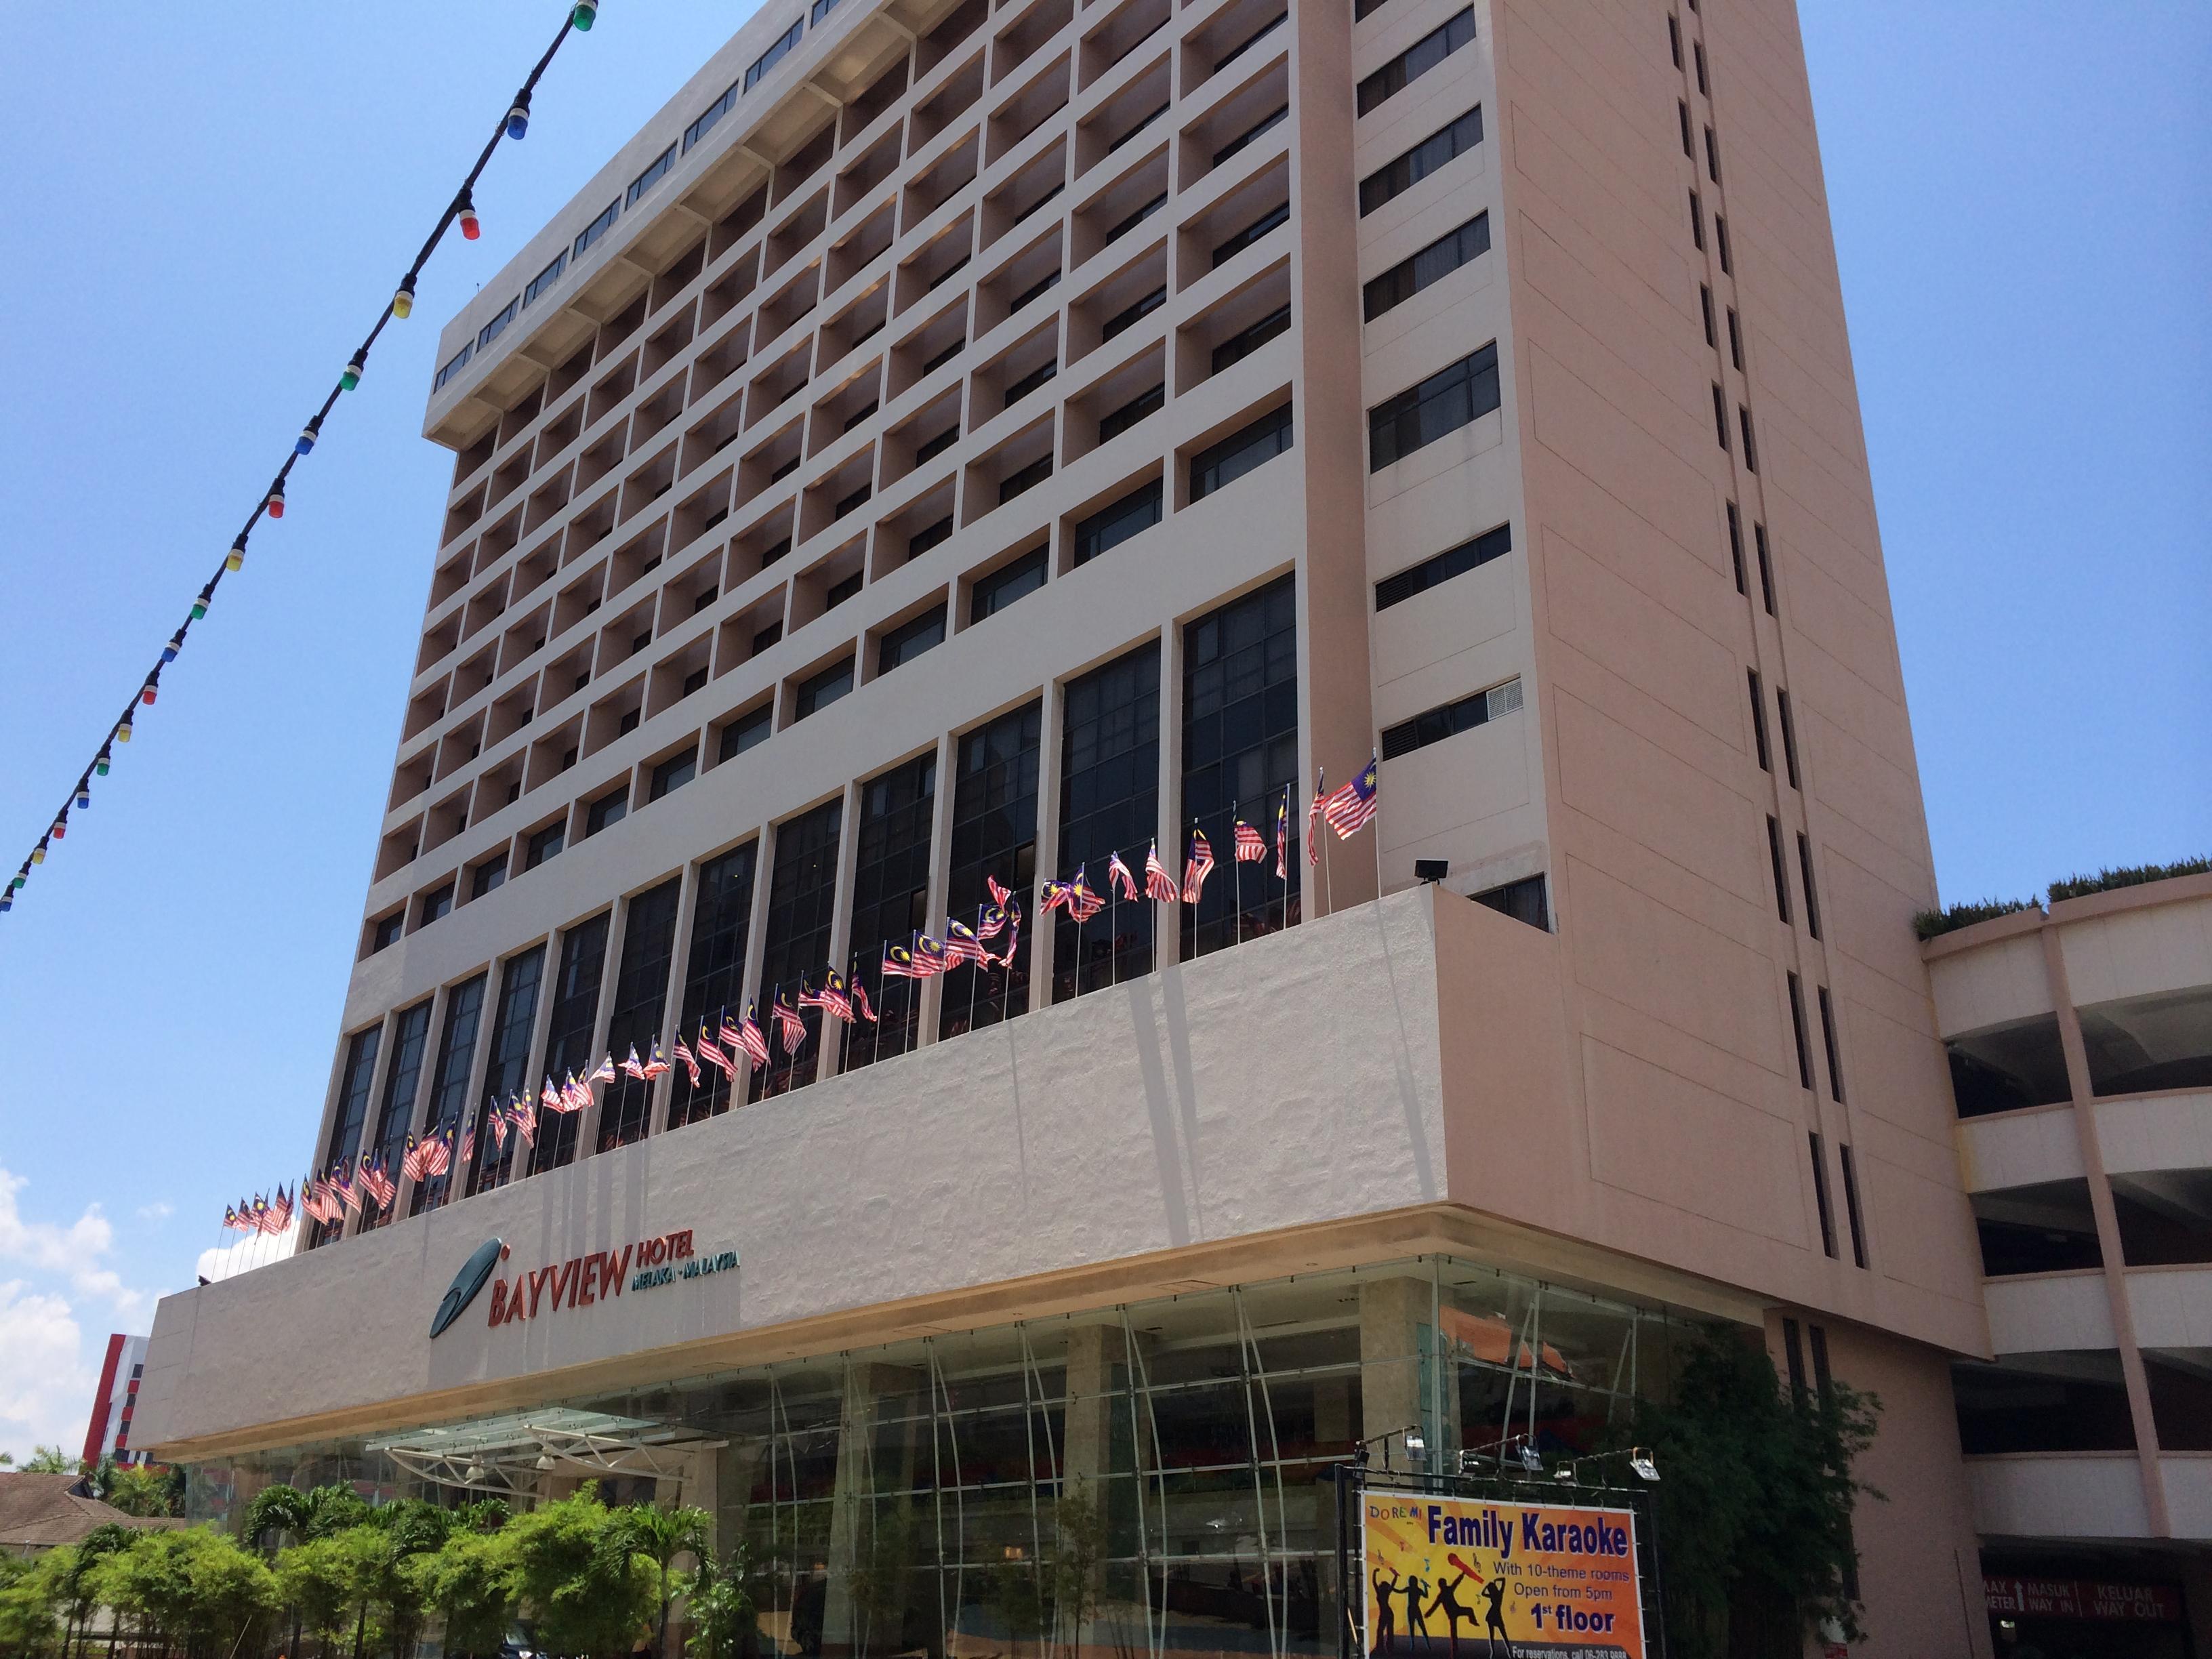 Bayview Hotel Melaka Malacca
 FAQ 2016, What facilities are there in Bayview Hotel Melaka Malacca
 2016, What Languages Spoken are Supported in Bayview Hotel Melaka Malacca
 2016, Which payment cards are accepted in Bayview Hotel Melaka Malacca
 , Malacca
 Bayview Hotel Melaka room facilities and services Q&A 2016, Malacca
 Bayview Hotel Melaka online booking services 2016, Malacca
 Bayview Hotel Melaka address 2016, Malacca
 Bayview Hotel Melaka telephone number 2016,Malacca
 Bayview Hotel Melaka map 2016, Malacca
 Bayview Hotel Melaka traffic guide 2016, how to go Malacca
 Bayview Hotel Melaka, Malacca
 Bayview Hotel Melaka booking online 2016, Malacca
 Bayview Hotel Melaka room types 2016.